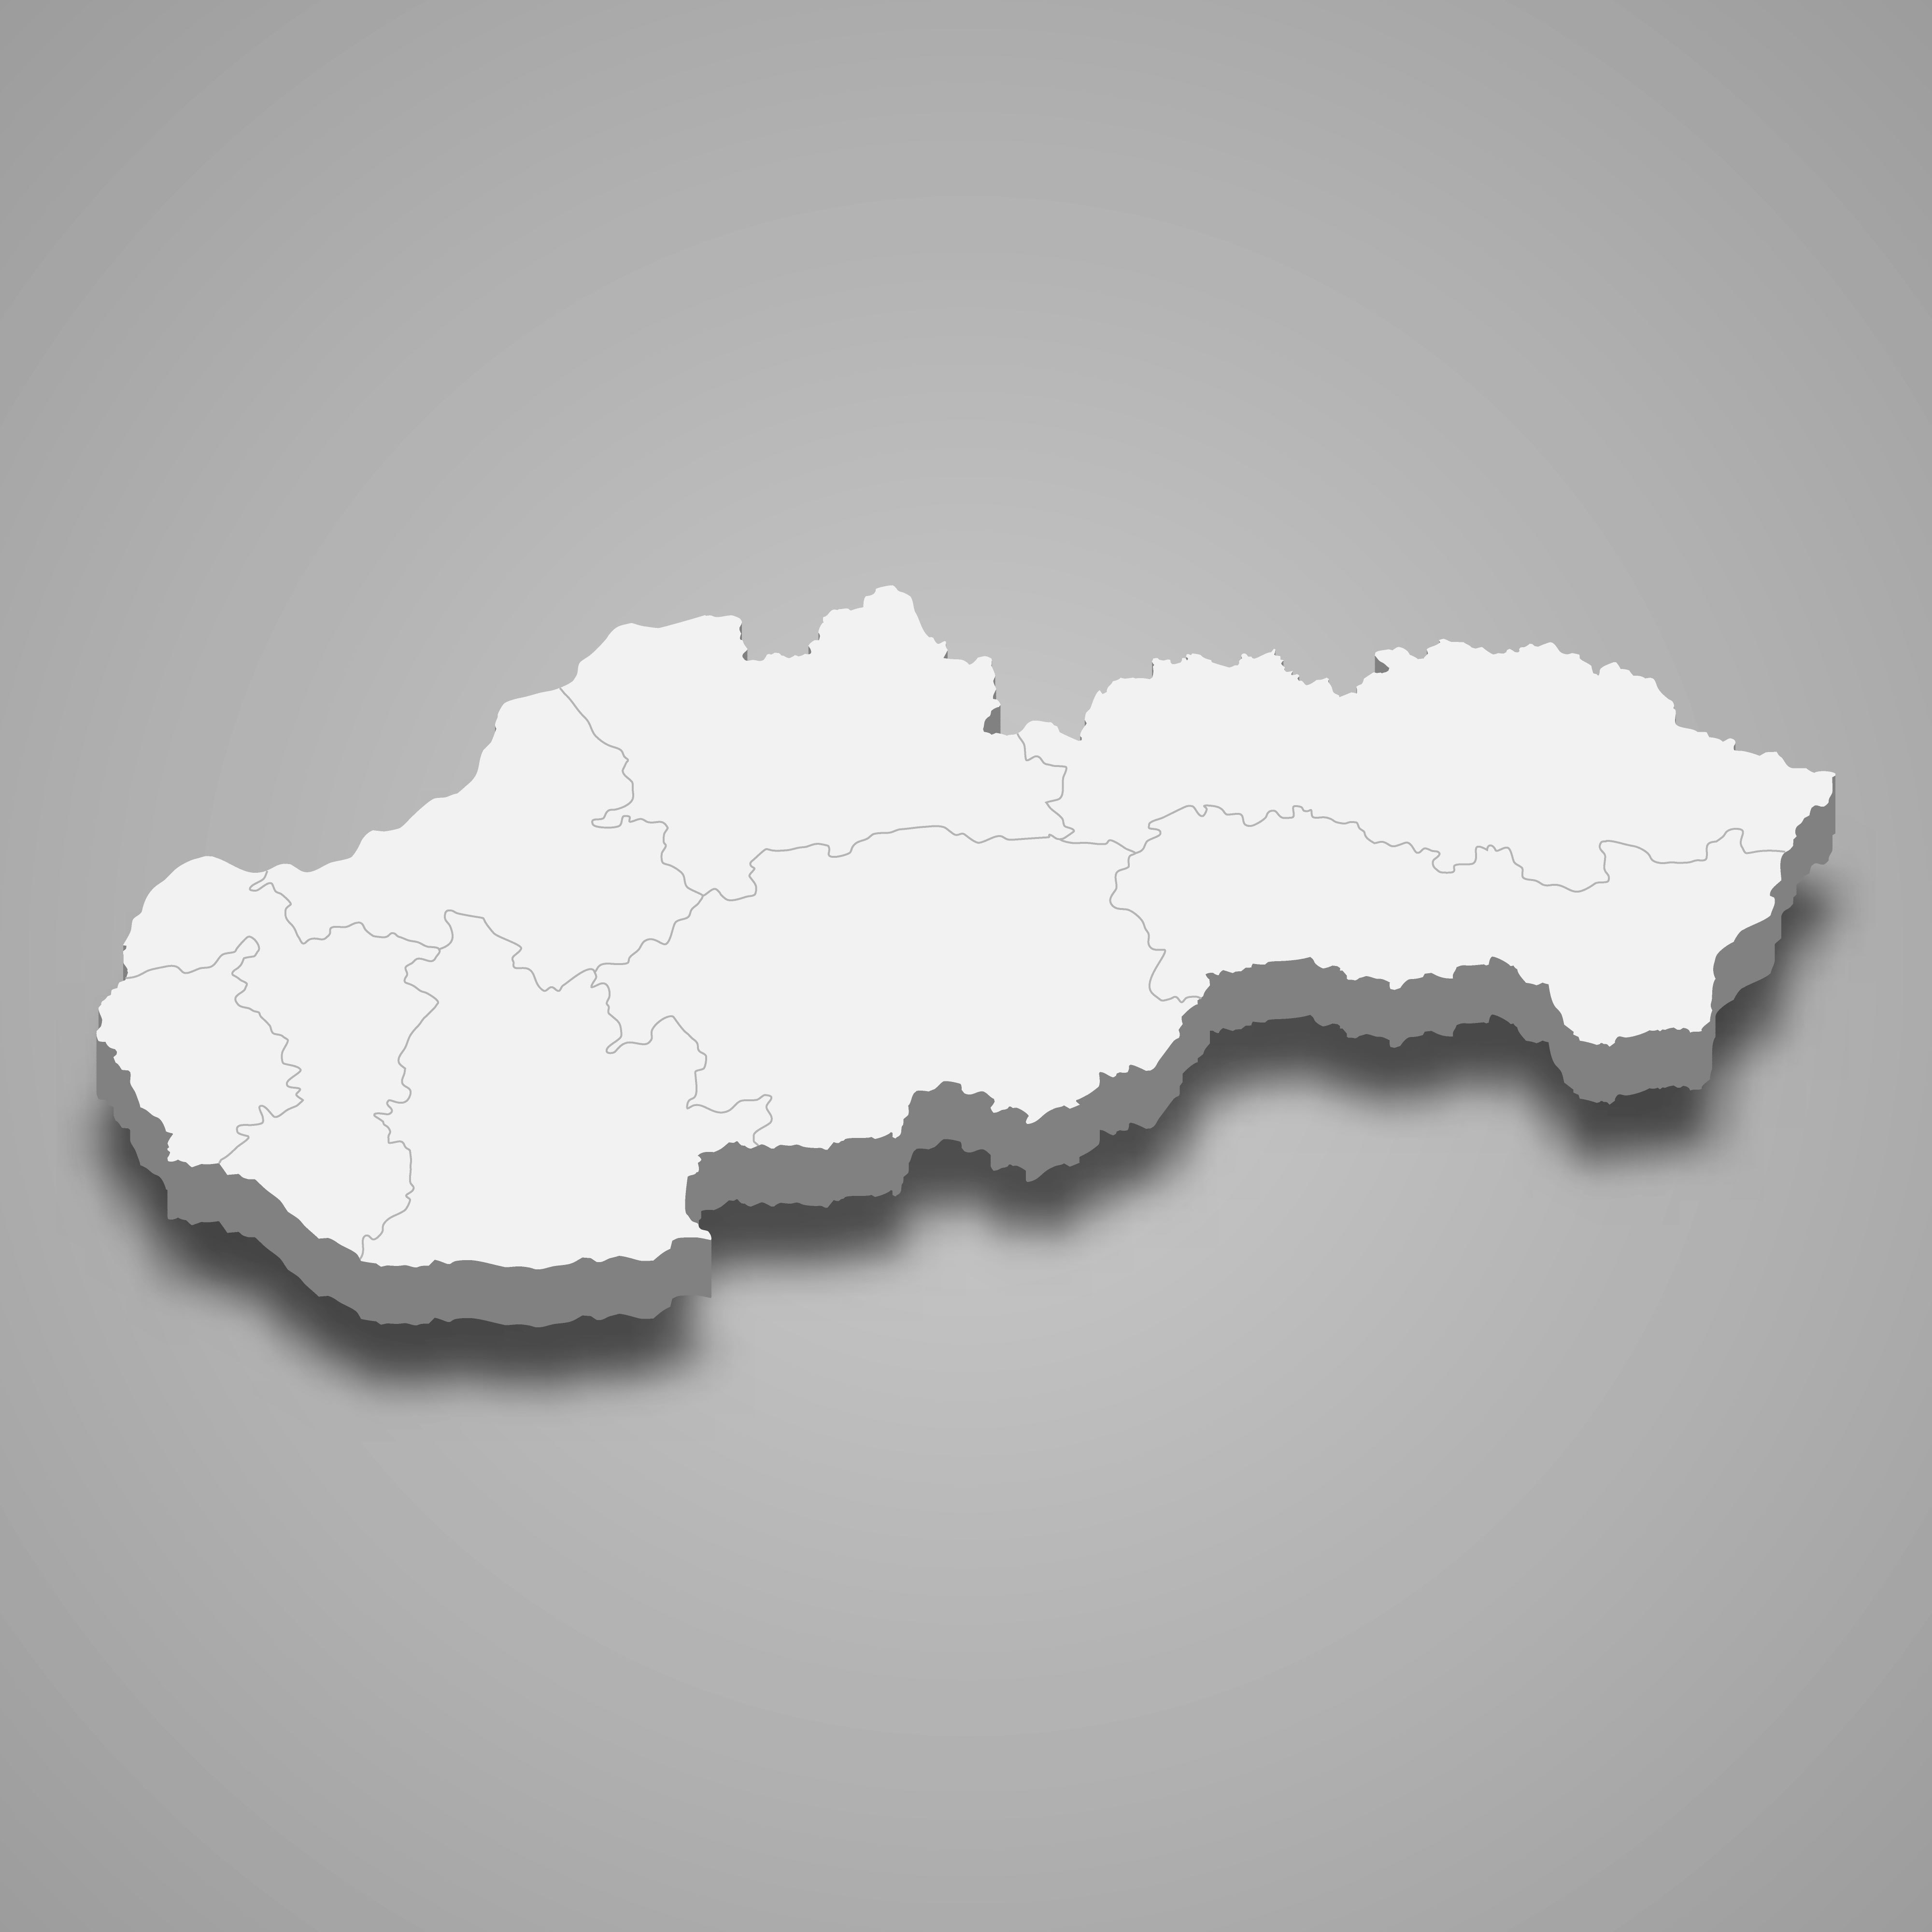 3d map of Slovakia with borders of regions. 3d map with borders Template for your design